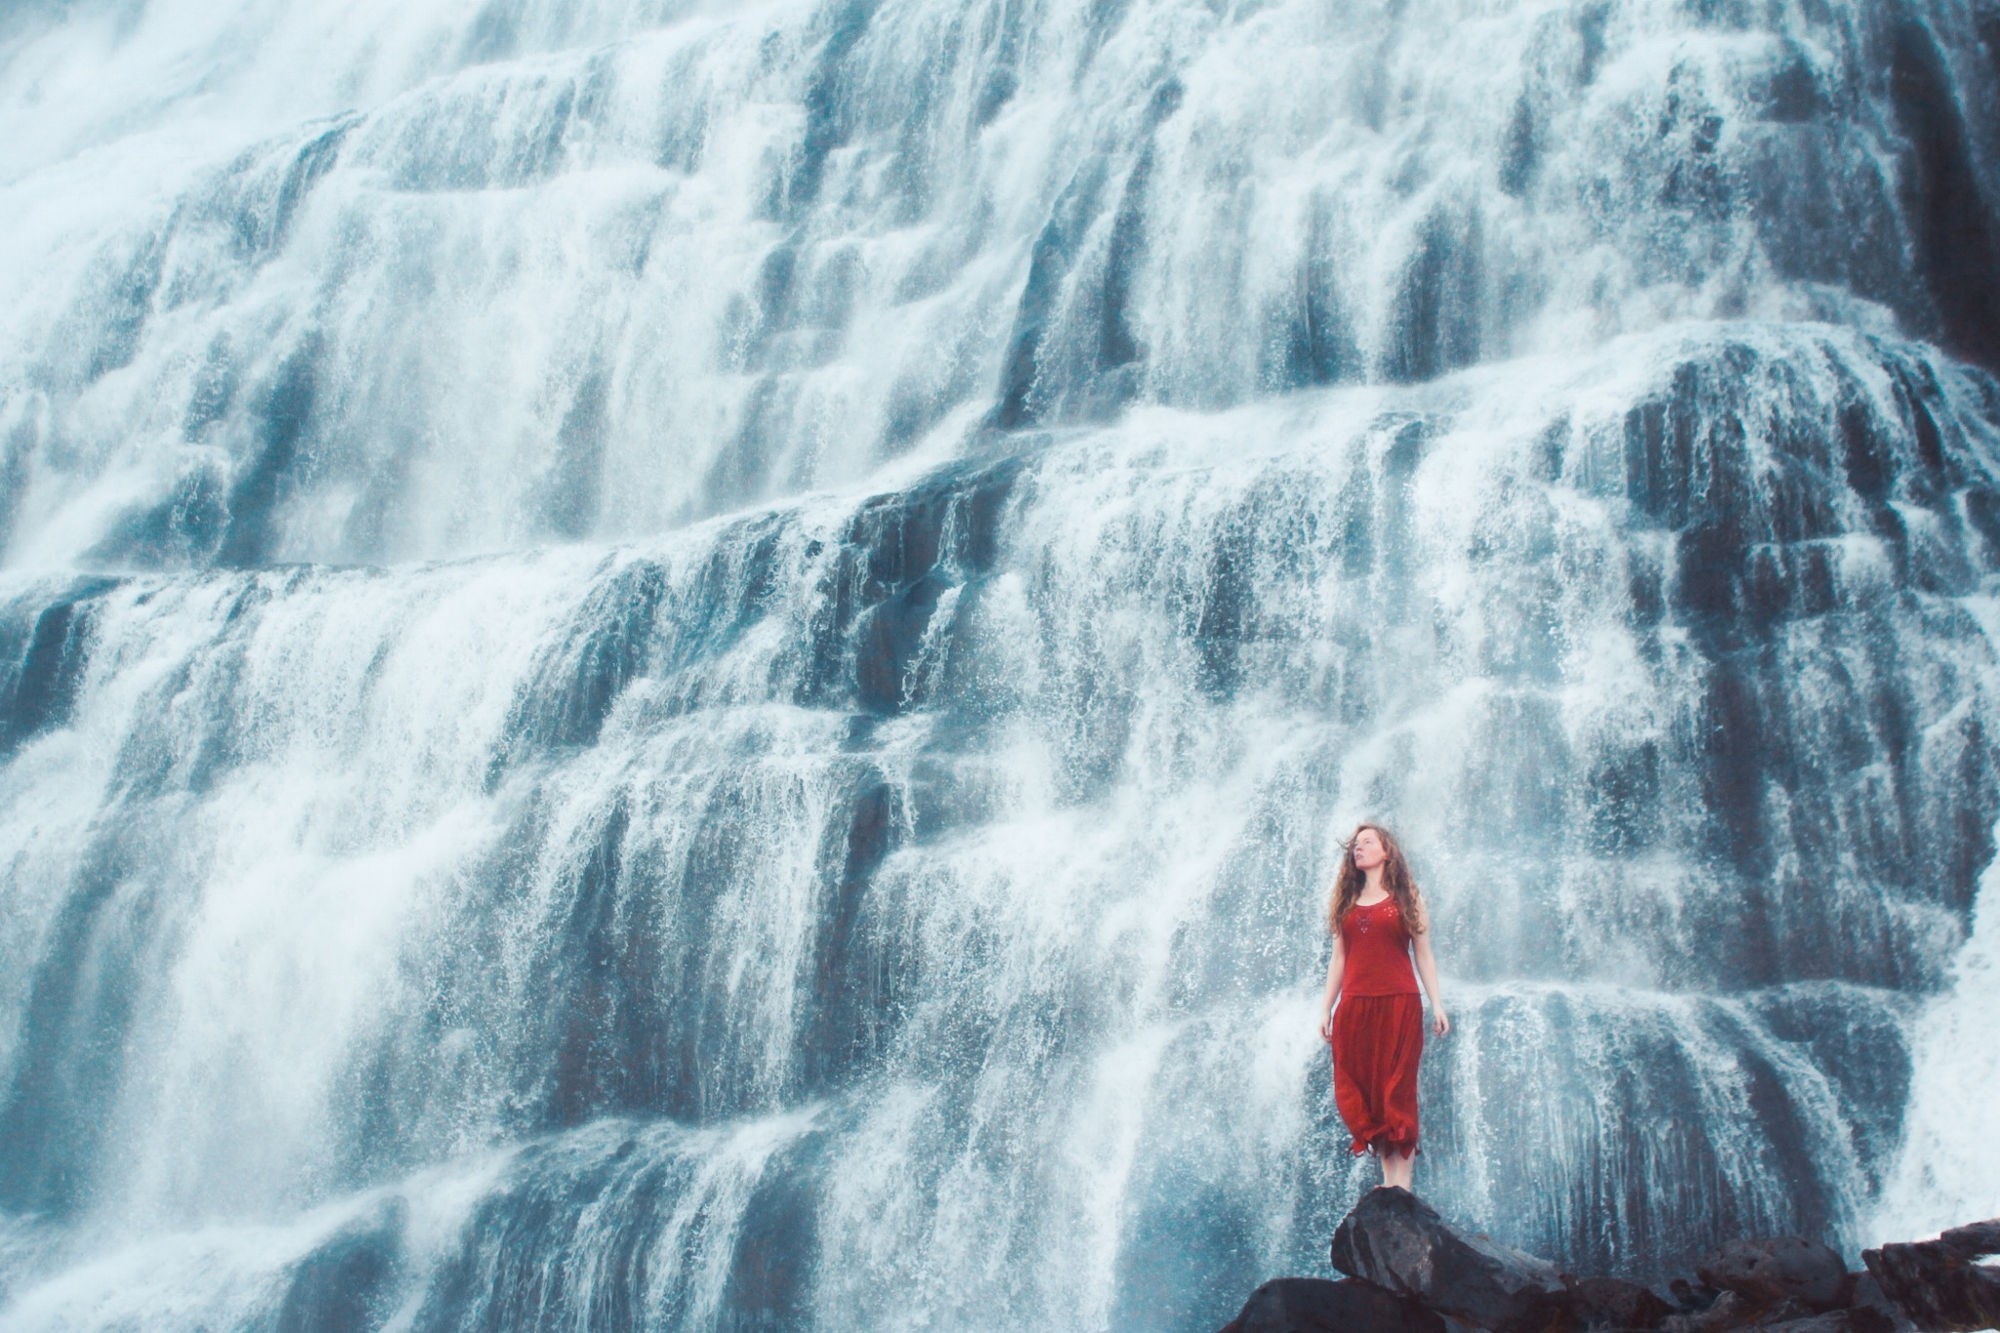 General 2000x1333 women nature water red dress waterfall women outdoors outdoors rocks stones dress red clothing alone model